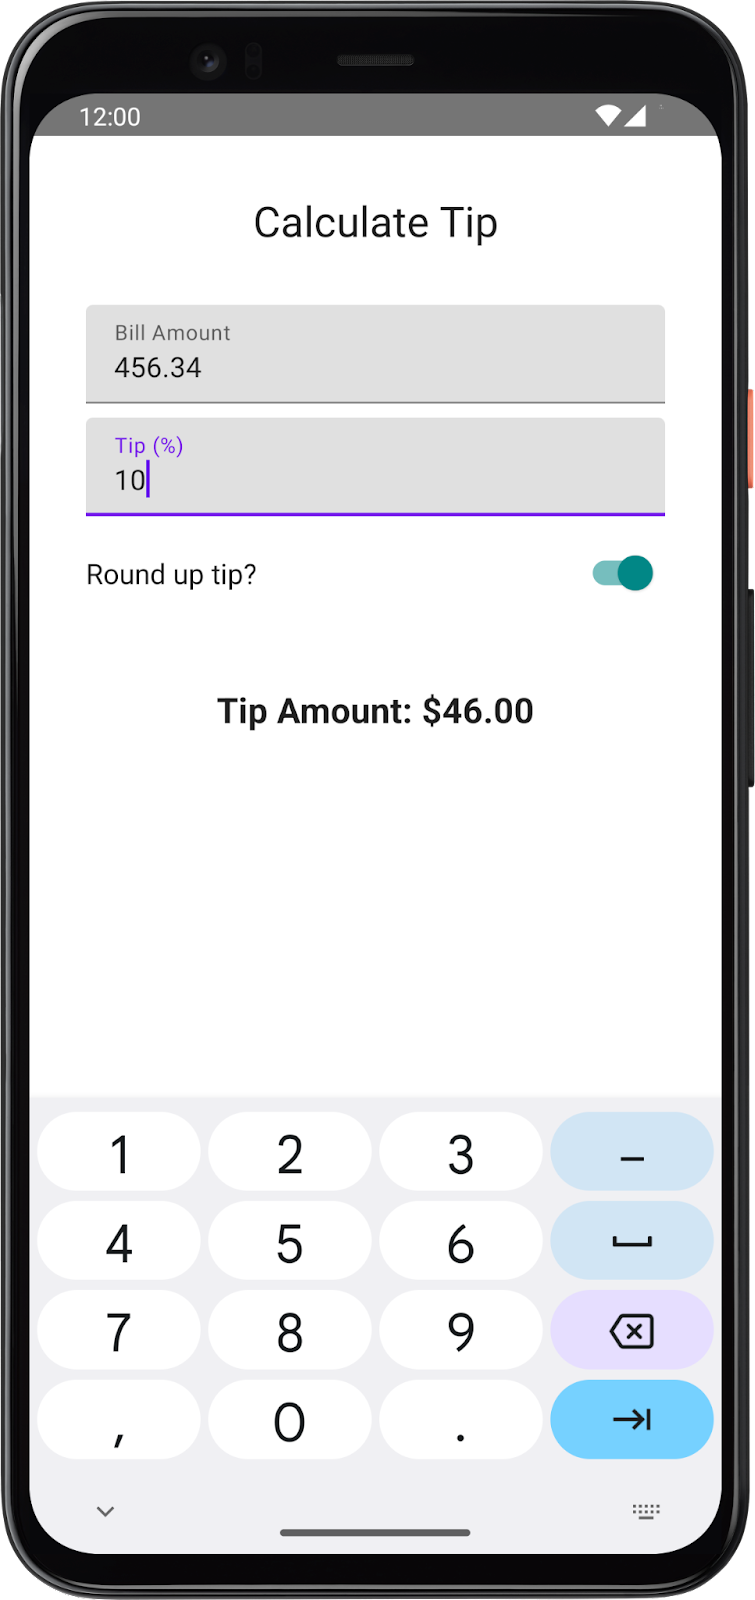 The images depicts the tip amount is rounded up.